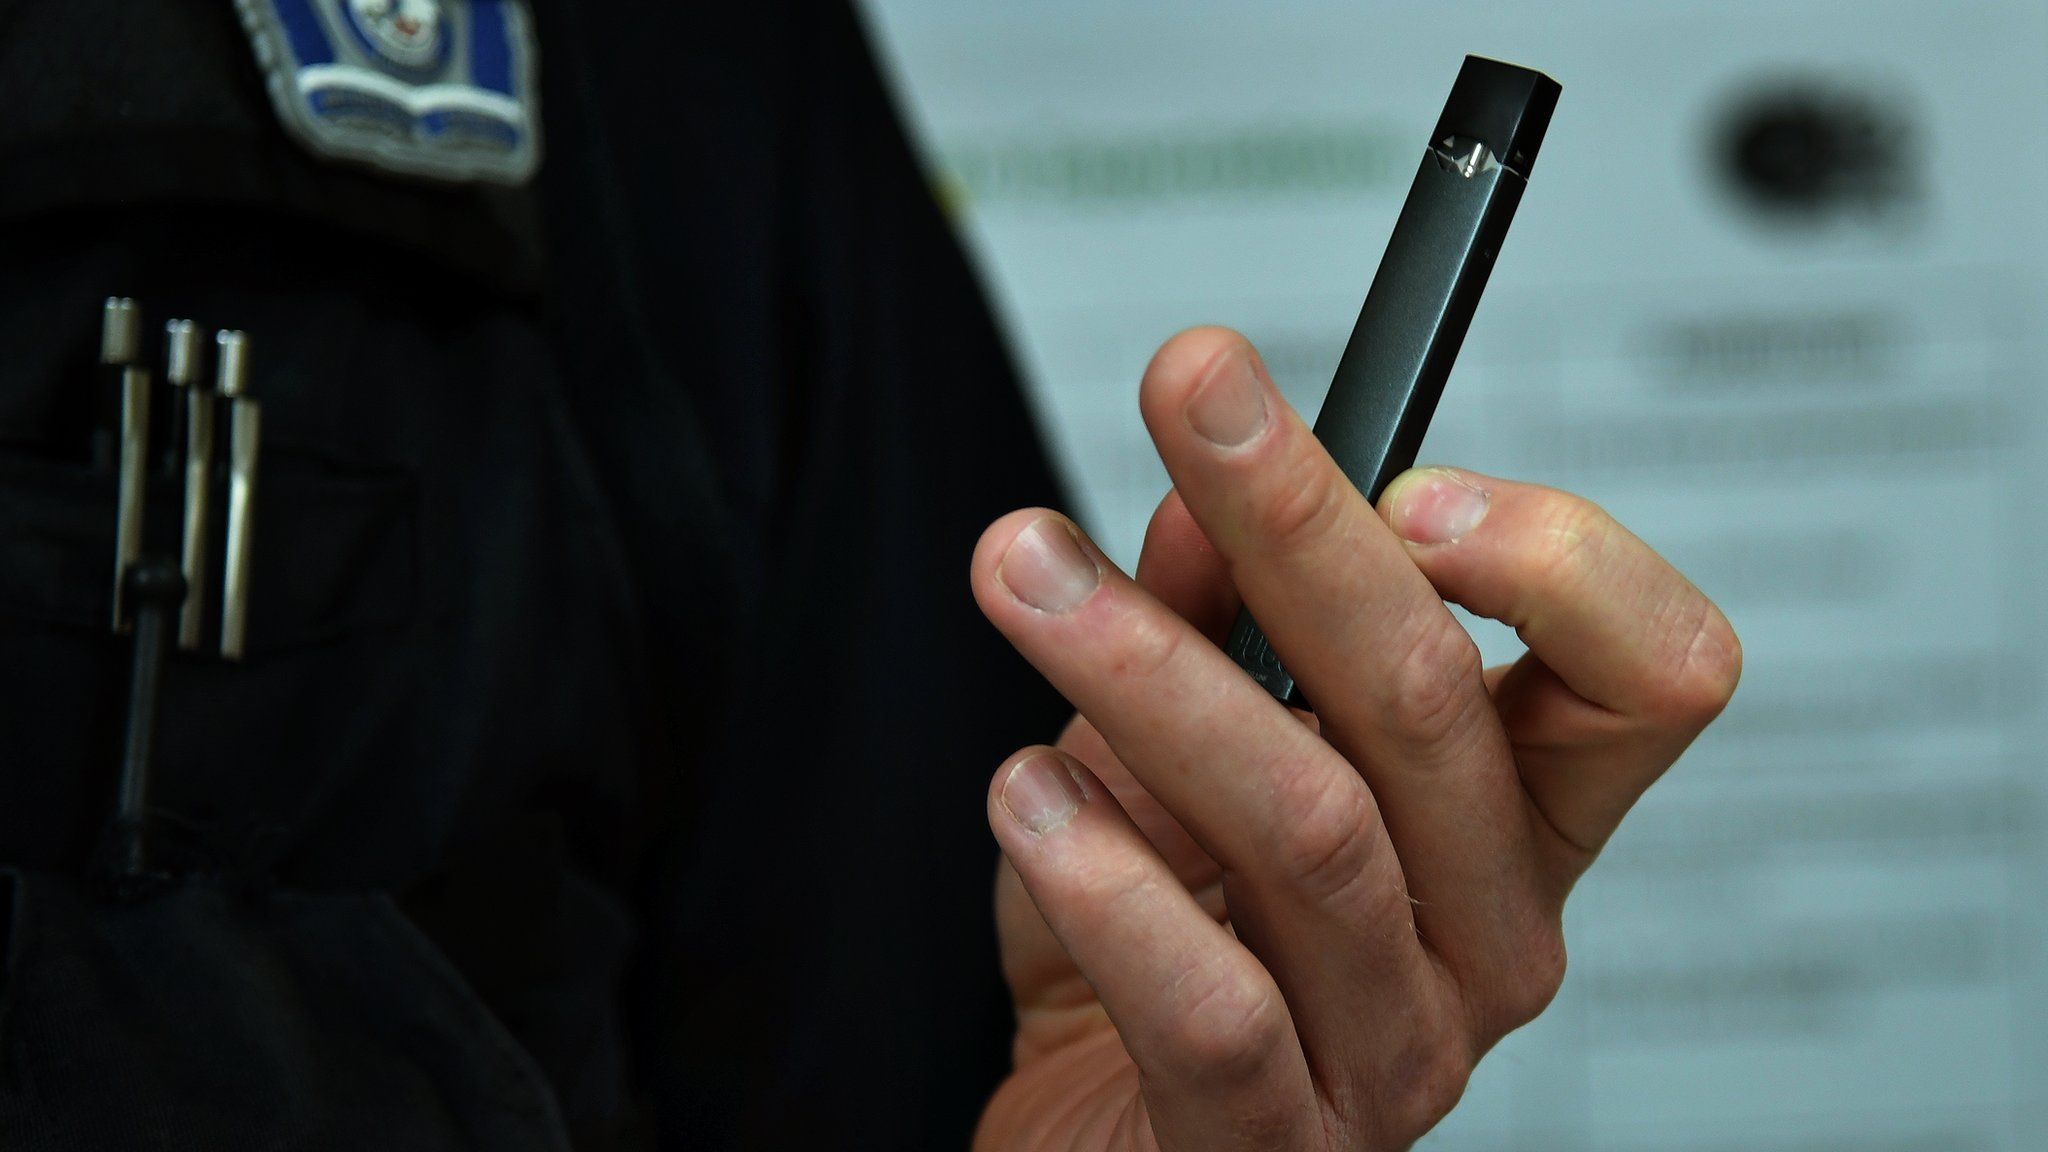 Detective Timothy Koch of the Arlington County police department school resource unit holds a JUUL device that's popular with teens in the area.